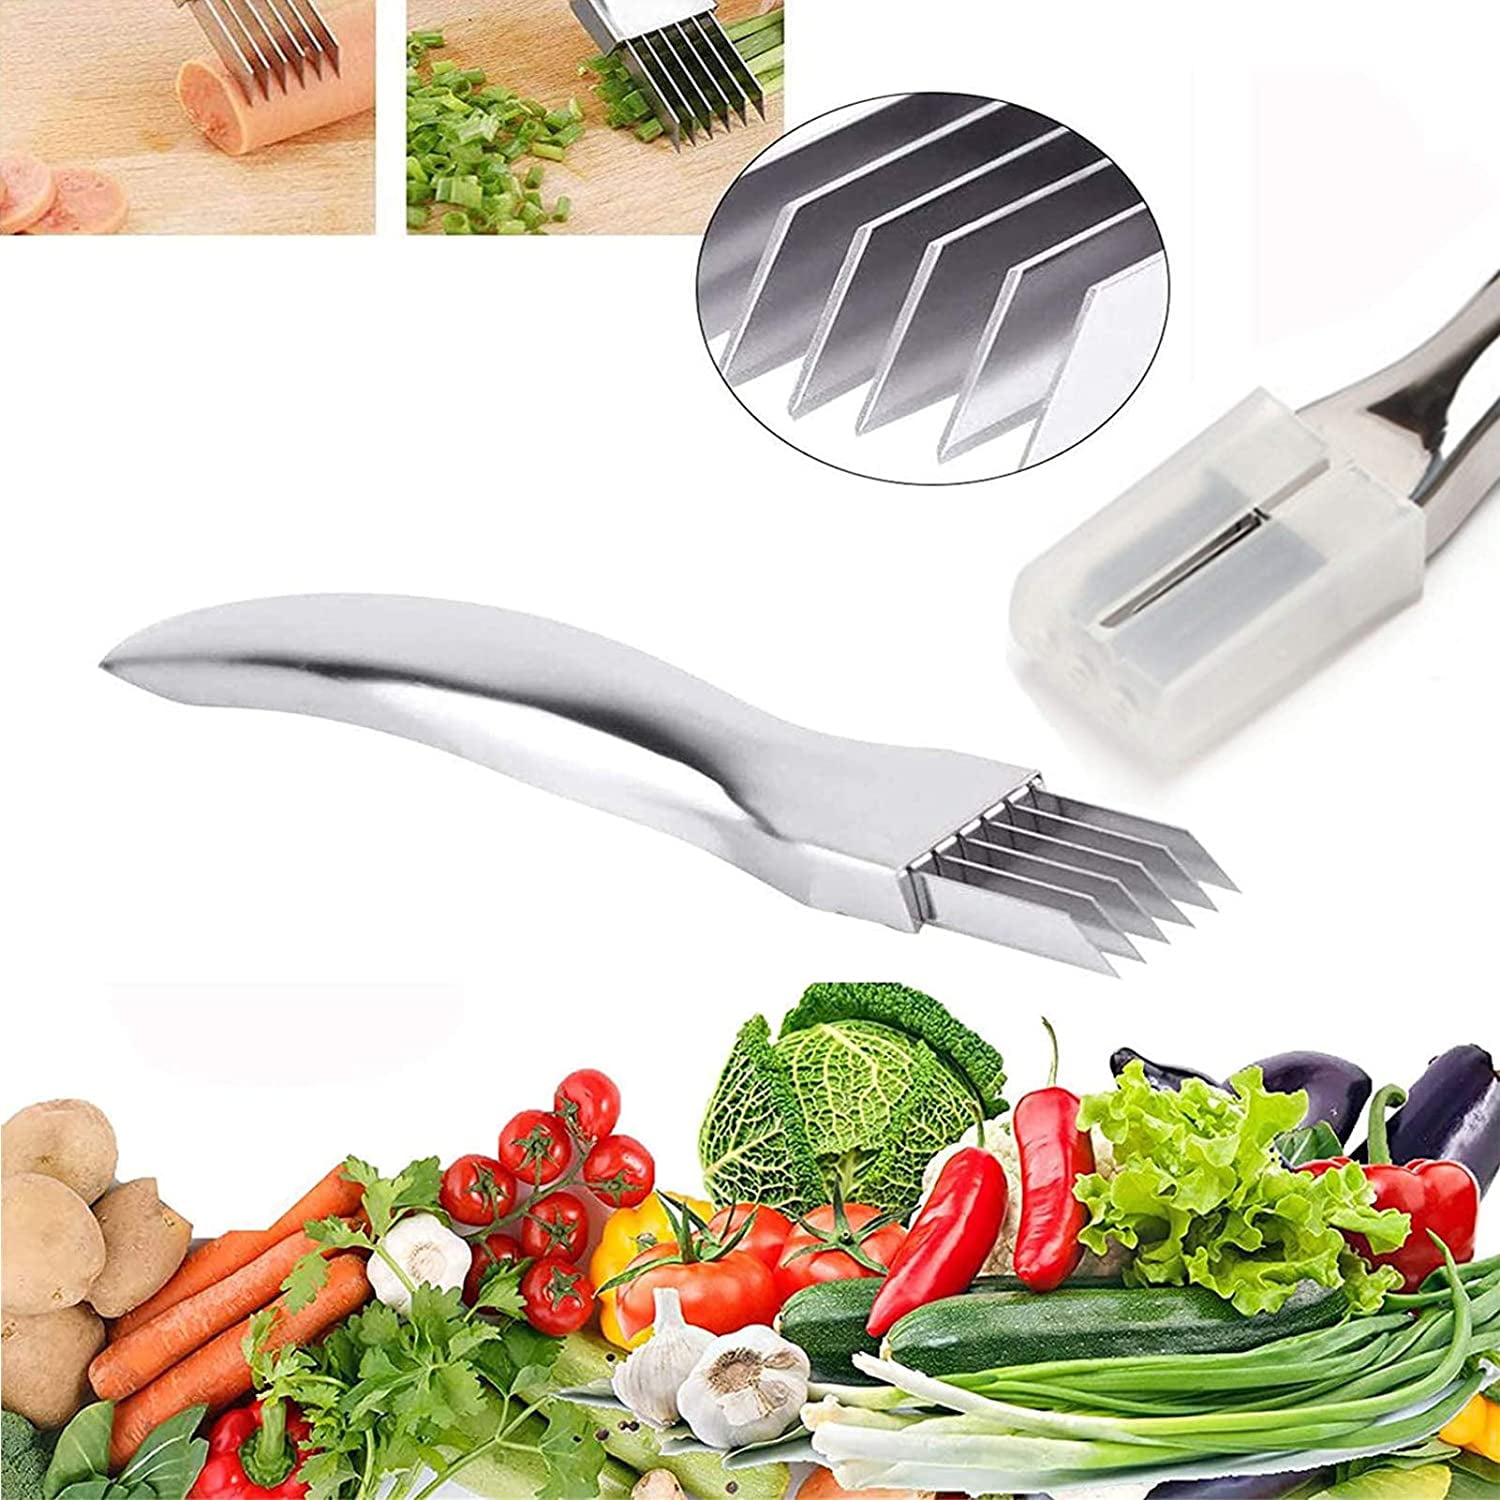 Stainless Steel Plum Blossom and Onion Cutter Tool, Scallion Piece Shredded  Cutting Knife, Kitchen Water Spinach Modeling